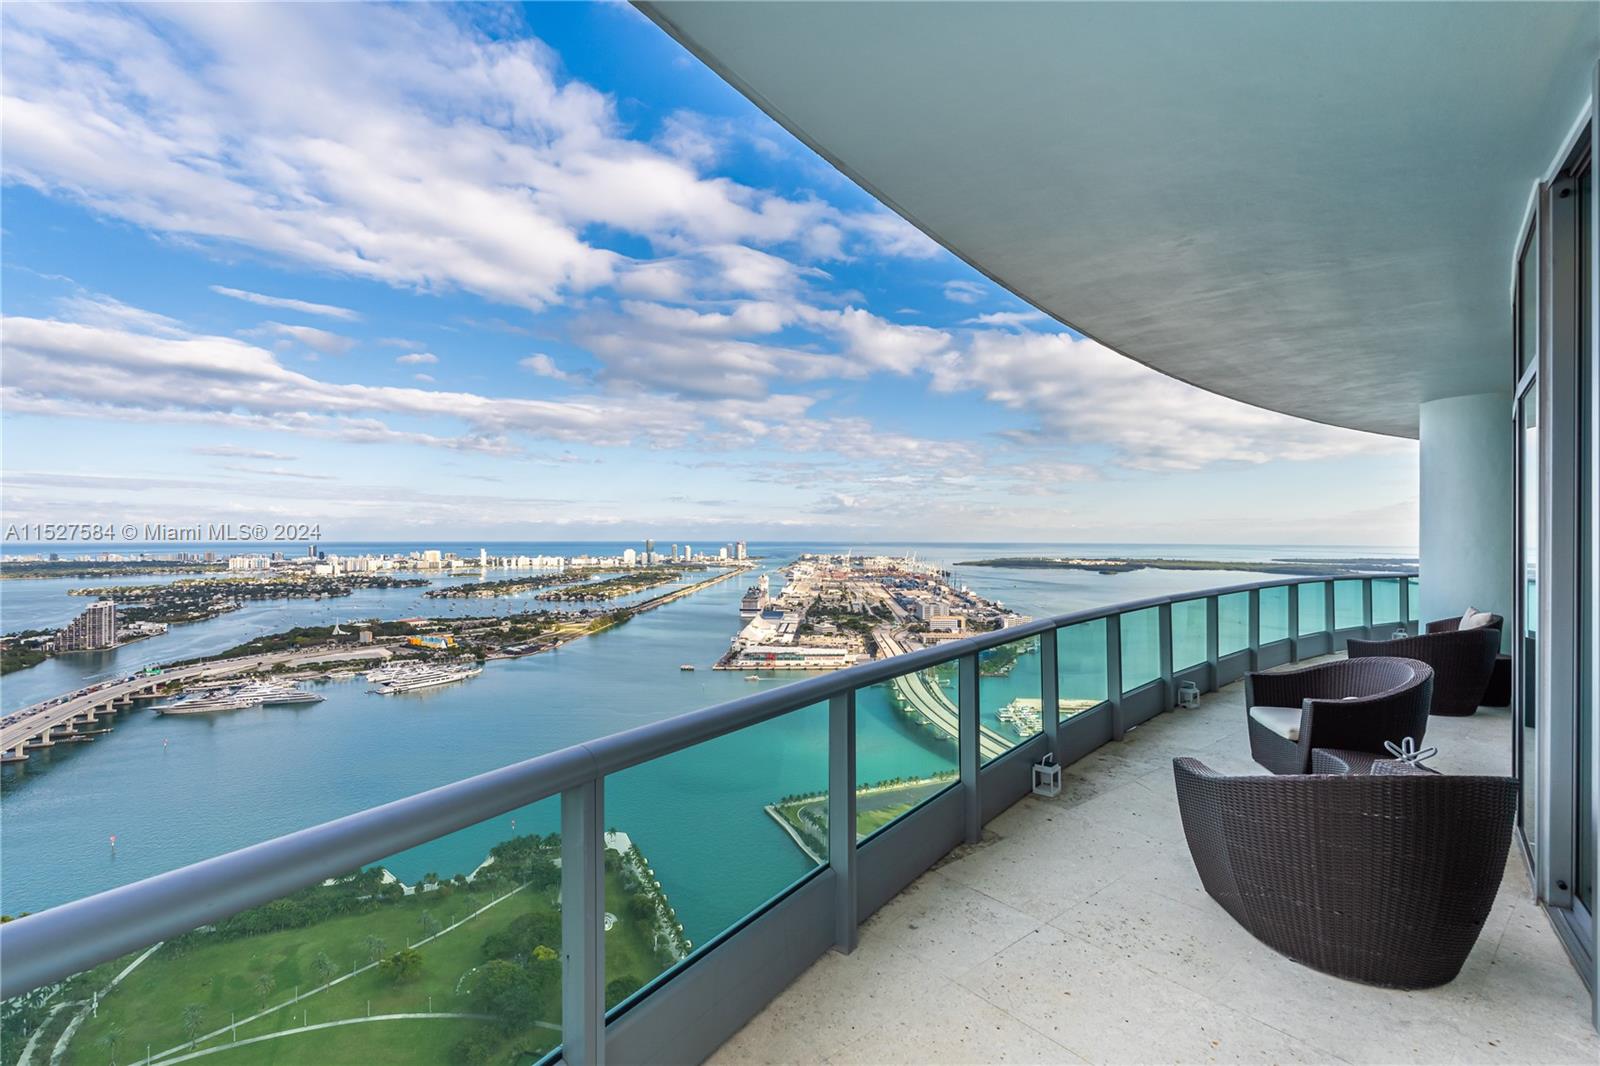 Welcome to the epitome of luxury living at 900 Biscayne Bay! Upon entering this Penthouse residence, you are immediately greeted by unobstructed panoramic views of the bay, ocean, and skyline from every room. This 3-bed, 5-bath penthouse is the epitome of elegance, featuring high-end finishes throughout and wrap-around terrace creating natural light. Entertain effortlessly in the expansive living area, bar, private theater, & chef's kitchen, with top-of-the-line stainless steel appliances & custom cabinetry. True oasis master suite with spa-like bath finishes and large WIC. Building offers spa like amenities which include sauna & steam room, multiple pools, fitness center, children’s playroom, theater, and clubroom & BBQ area. Walk to museums, gyms, fine restaurants, and the Kaseya Center.